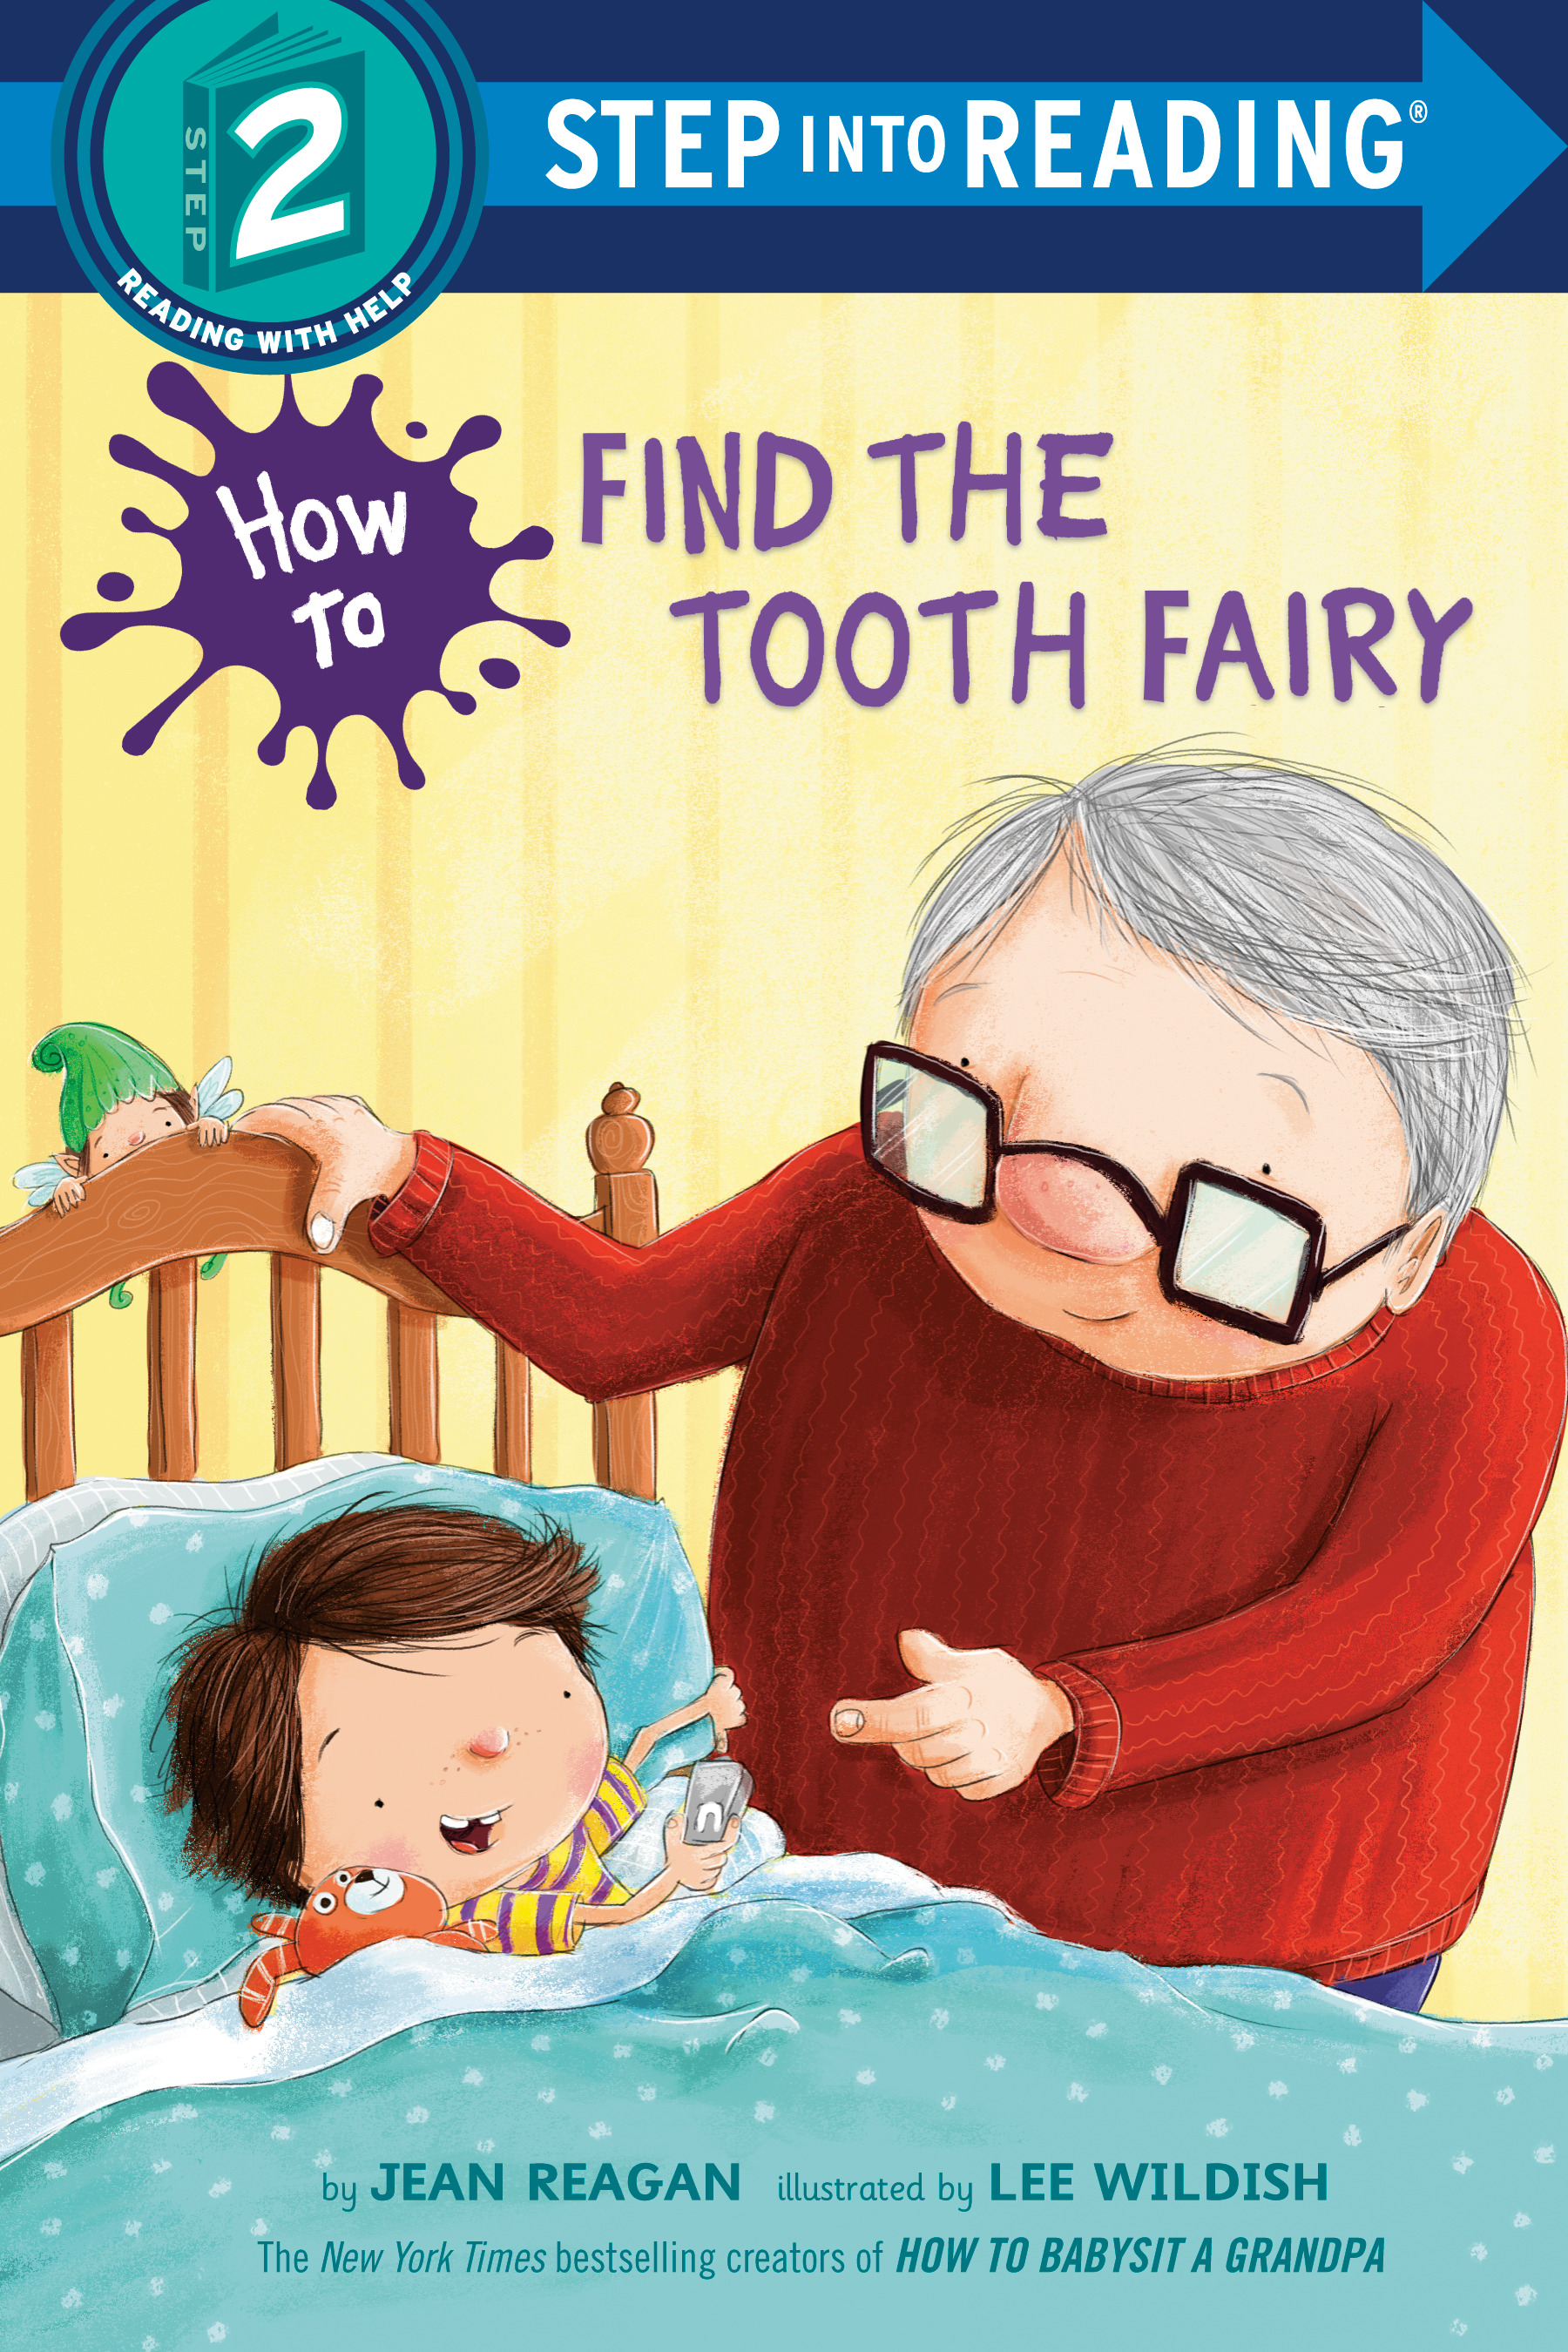 How to Find the Tooth Fairy | Reagan, Jean